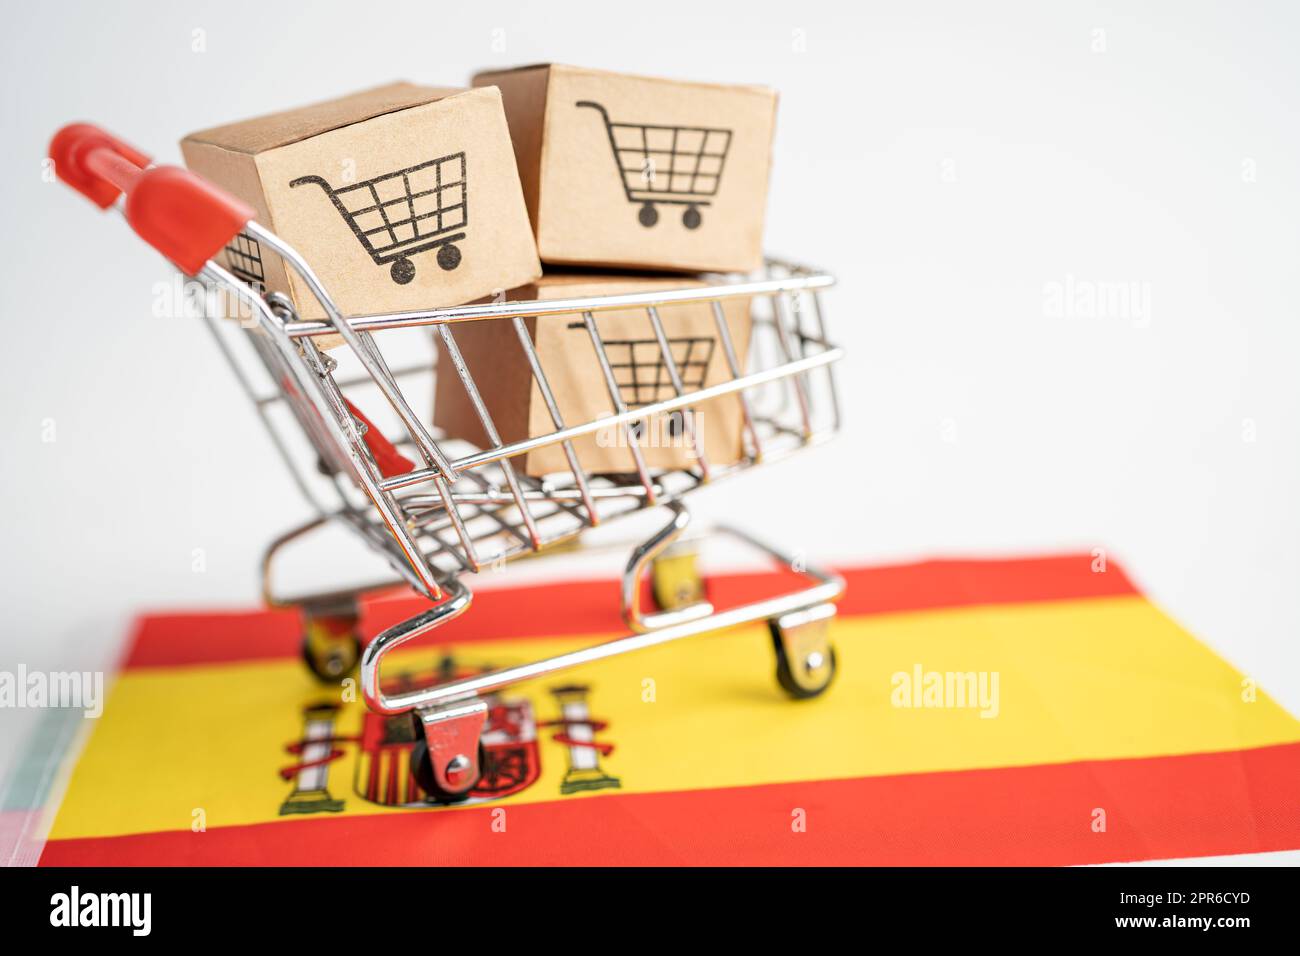 Box with shopping cart logo and Spain flag, Import Export Shopping online or eCommerce finance delivery service store product shipping, trade, supplier concept. Stock Photo